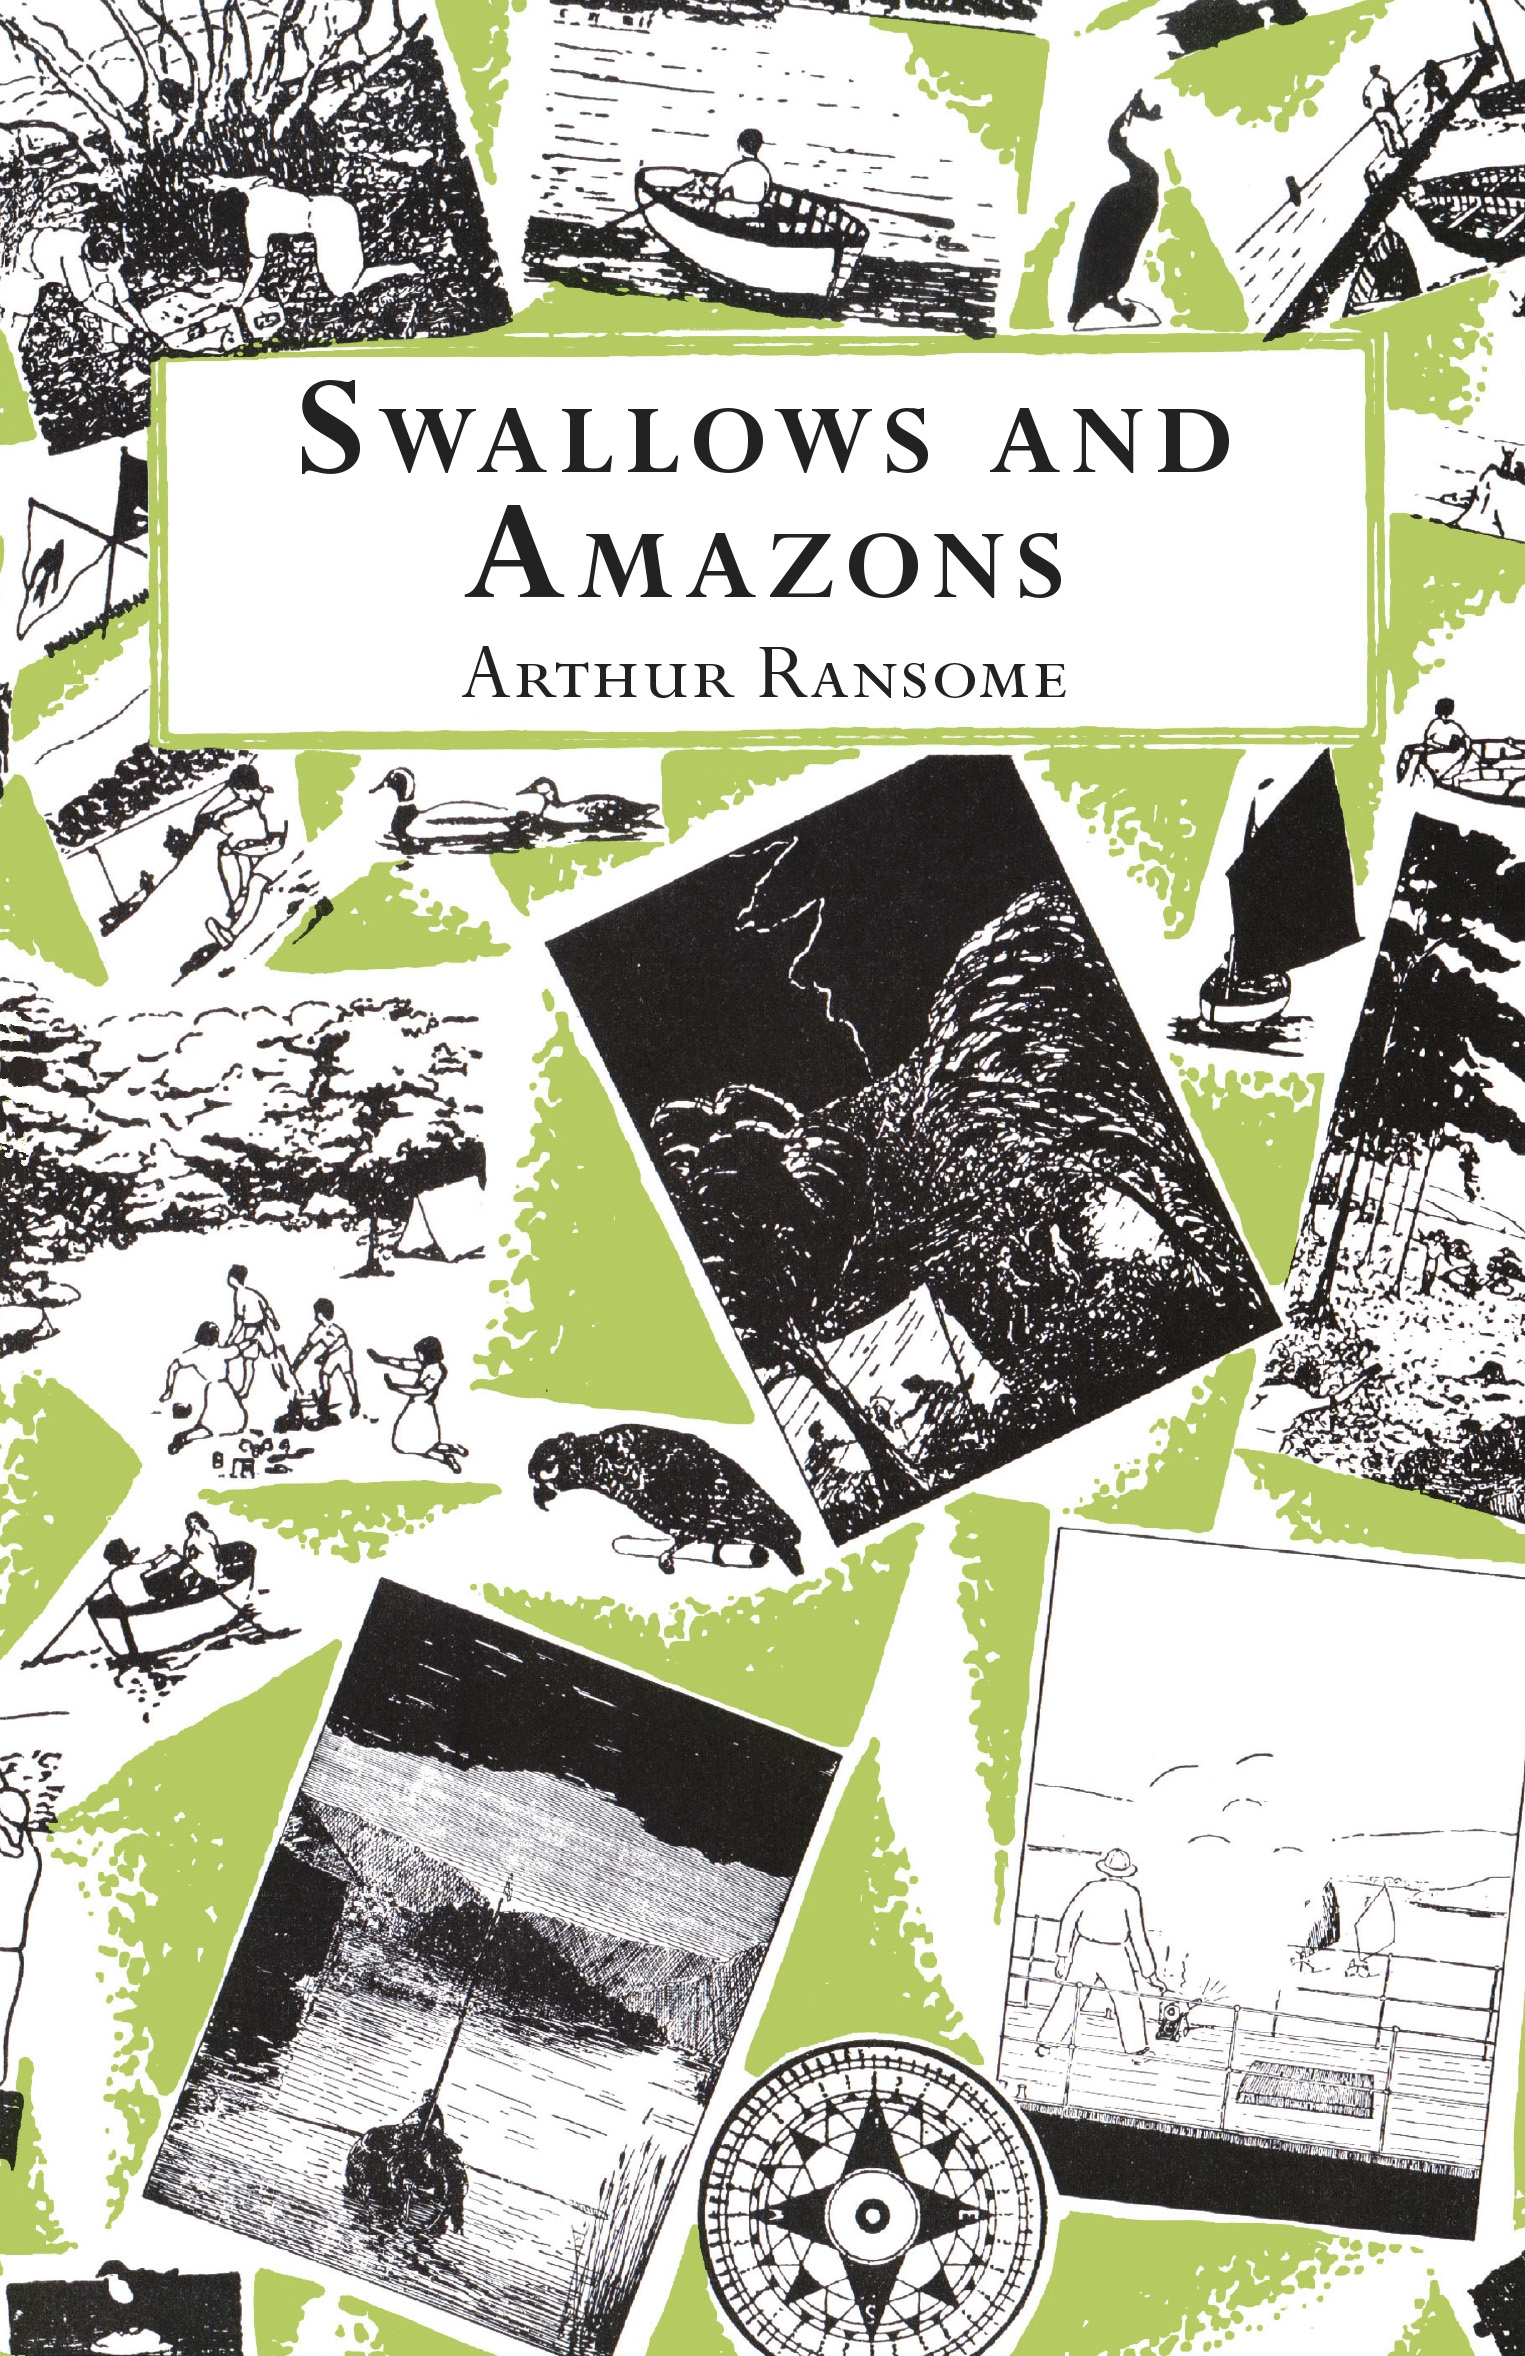 Swallows and s by Arthur Ransome - Penguin Books New Zealand